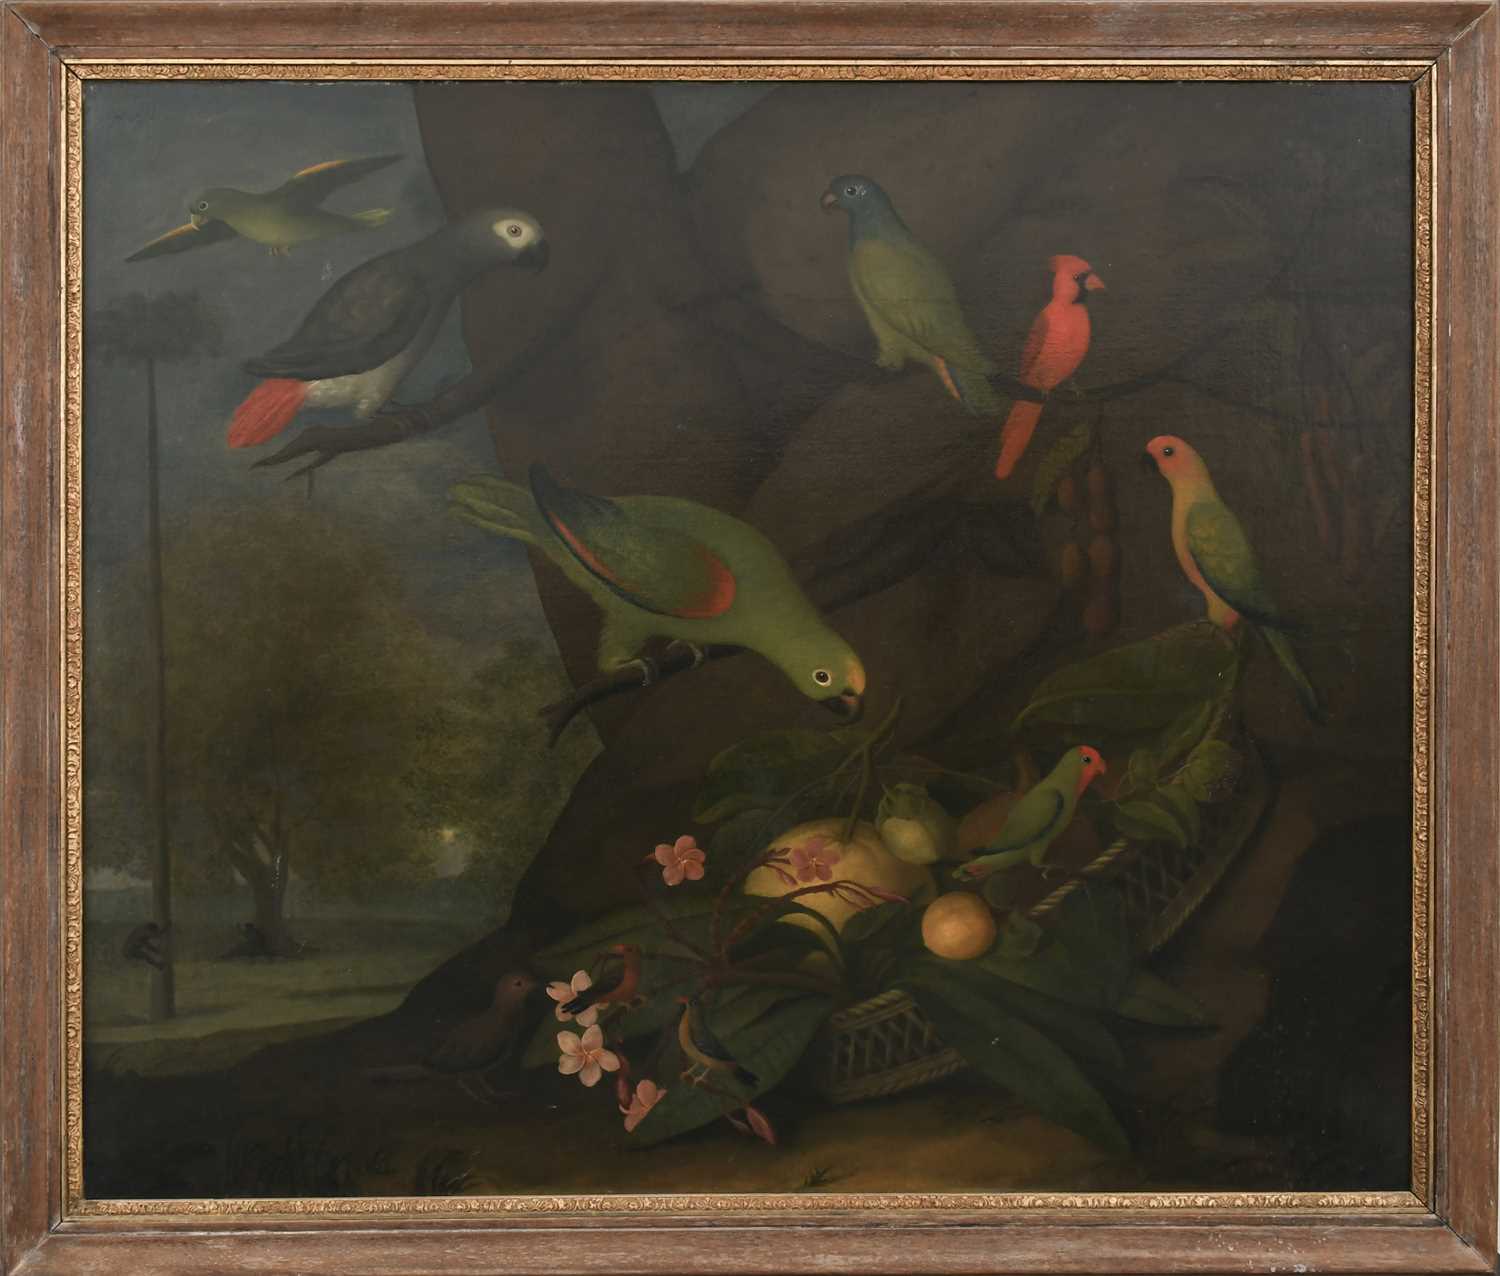 DUTCH-COLONIAL SCHOOL 18TH CENTURY Exotic birds, fruit, flowers and nuts in a landscape with a man